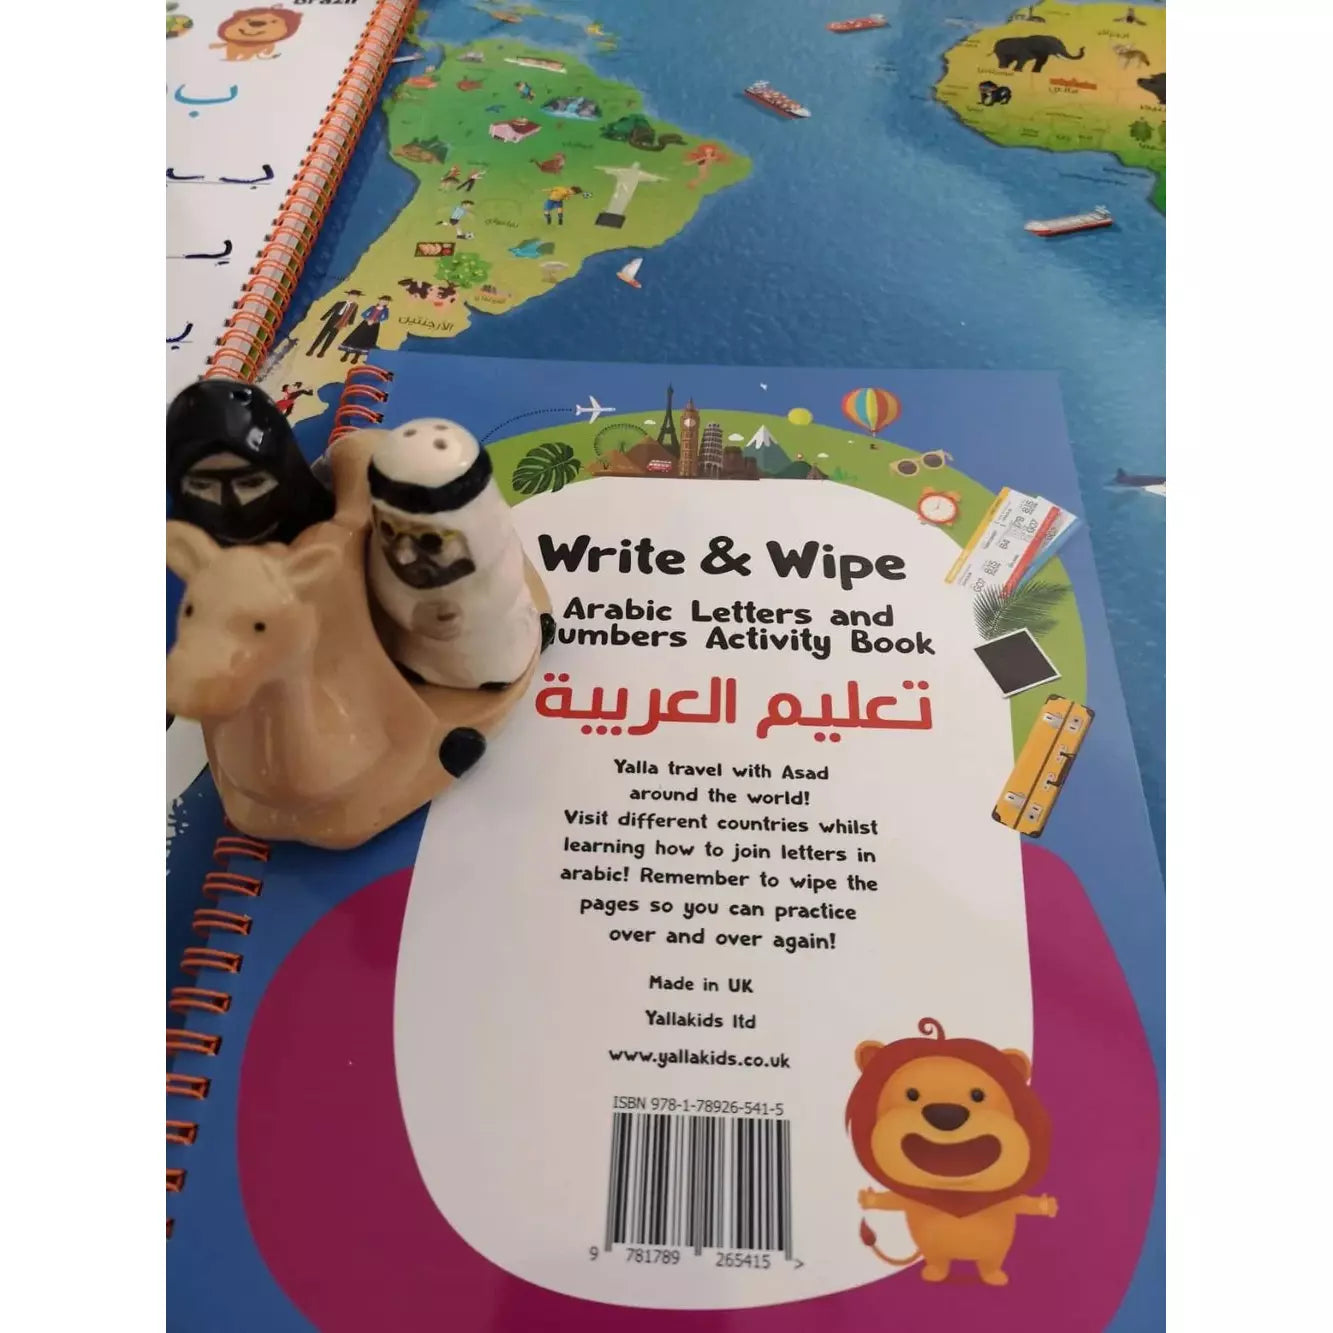 Write & Wipe Arabic Letters & Numbers Book (Travel Theme)